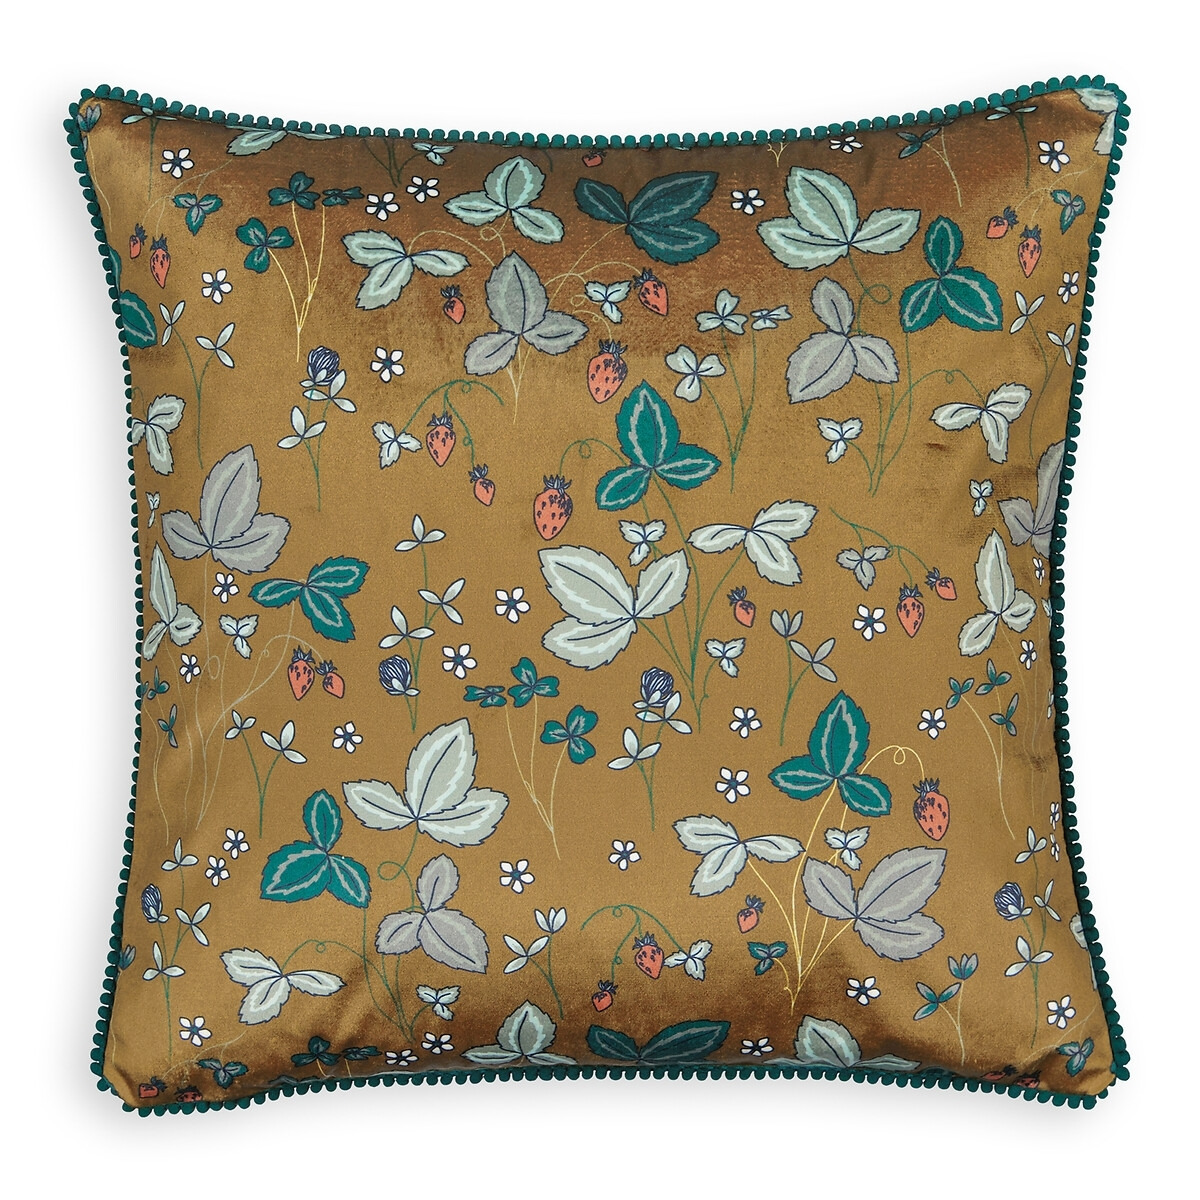 Firya Floral Cushion Cover - image 1